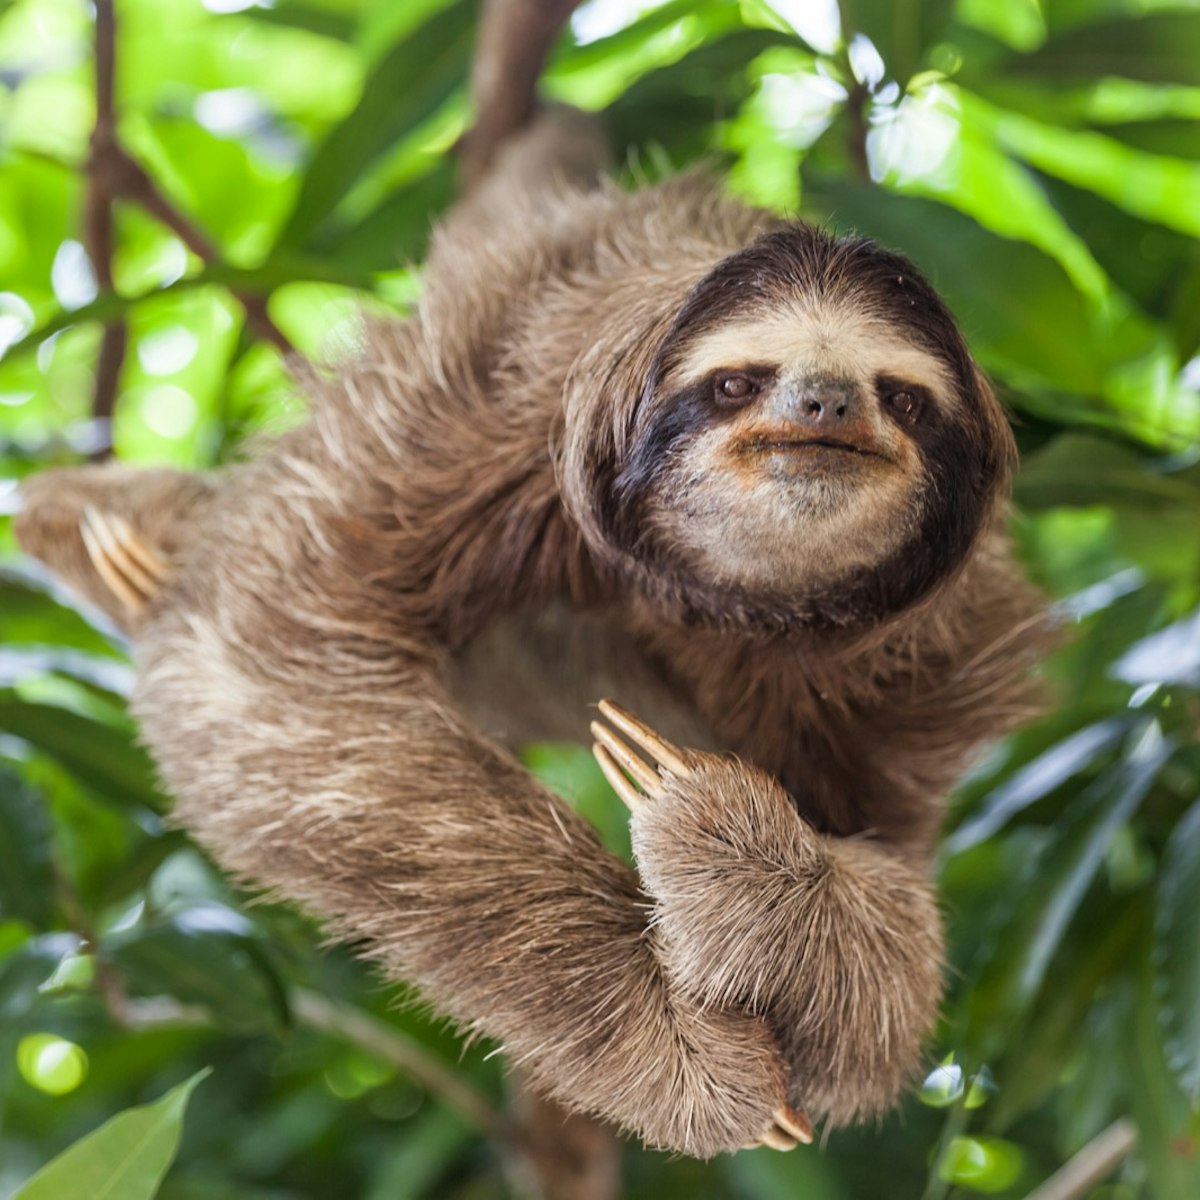 The sloth on the tree; Shutterstock ID 624132143; Your name (First / Last): Alicia Johnson; GL account no.: 65050; Netsuite department name: Online Editorial ; Full Product or Project name including edition: Panama